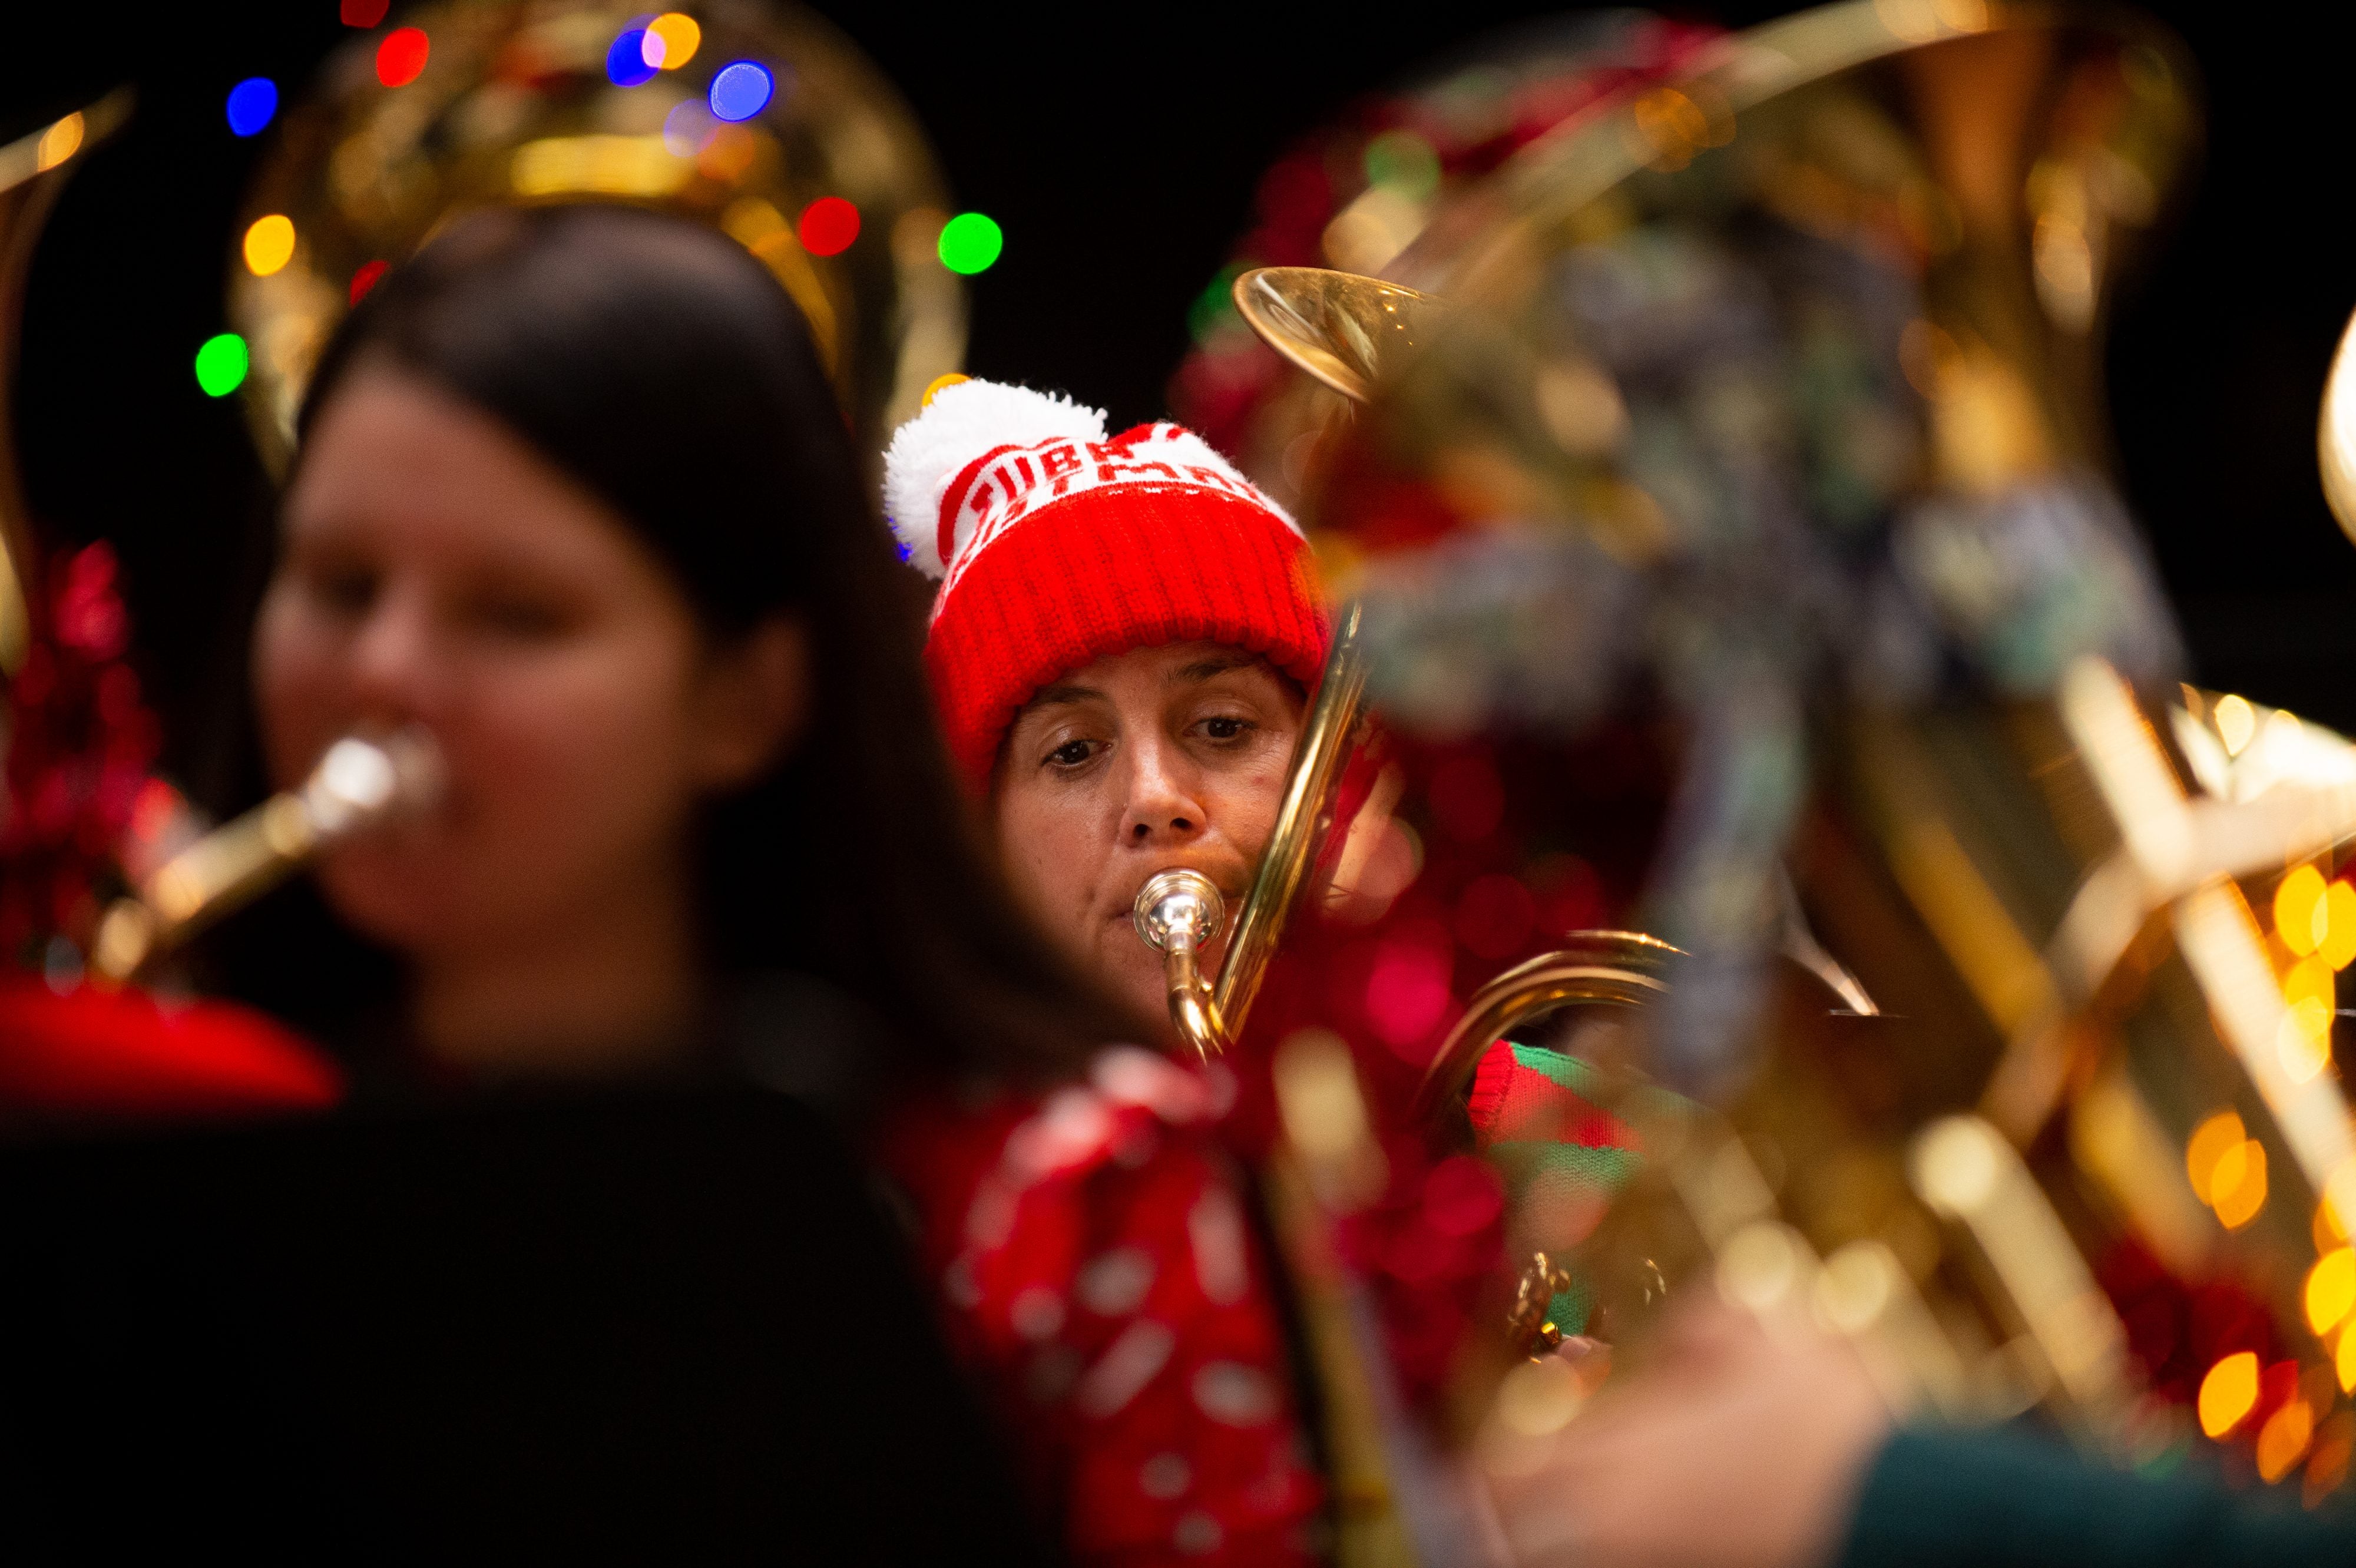 In 29th year, TubaChristmas concert in Philly gives love to and gets